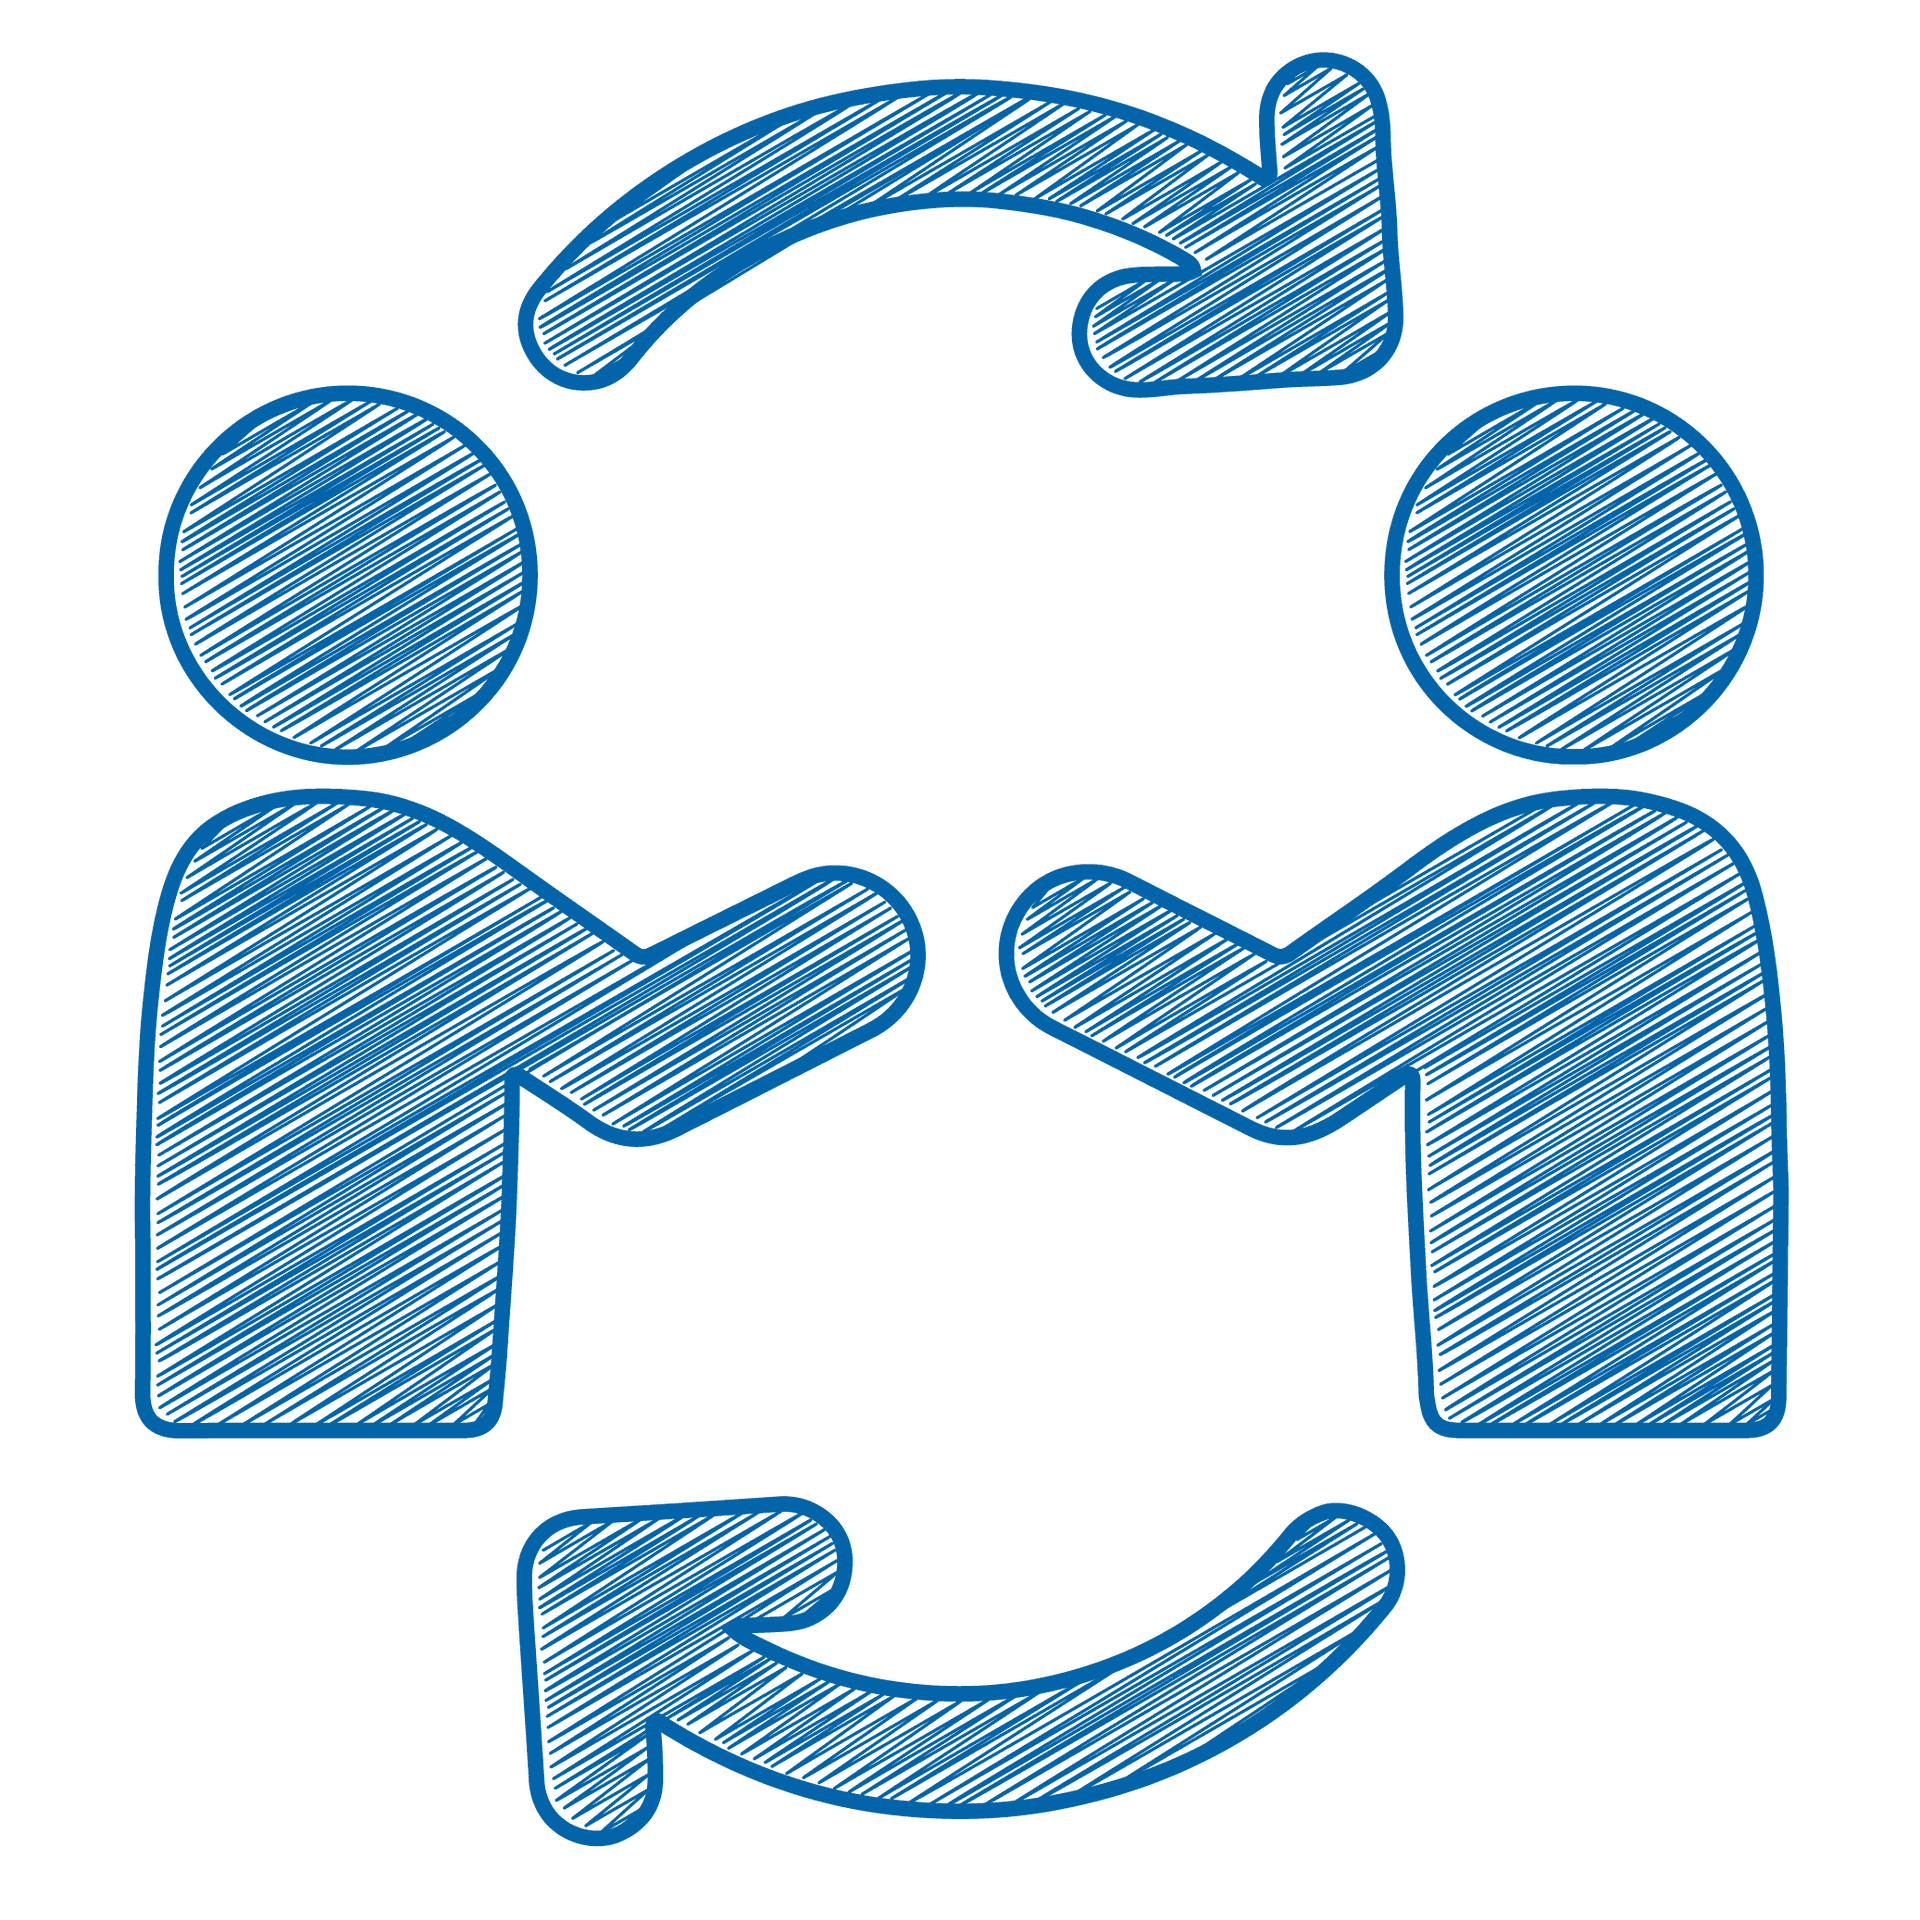 Pictogram of two people exchanging with each other